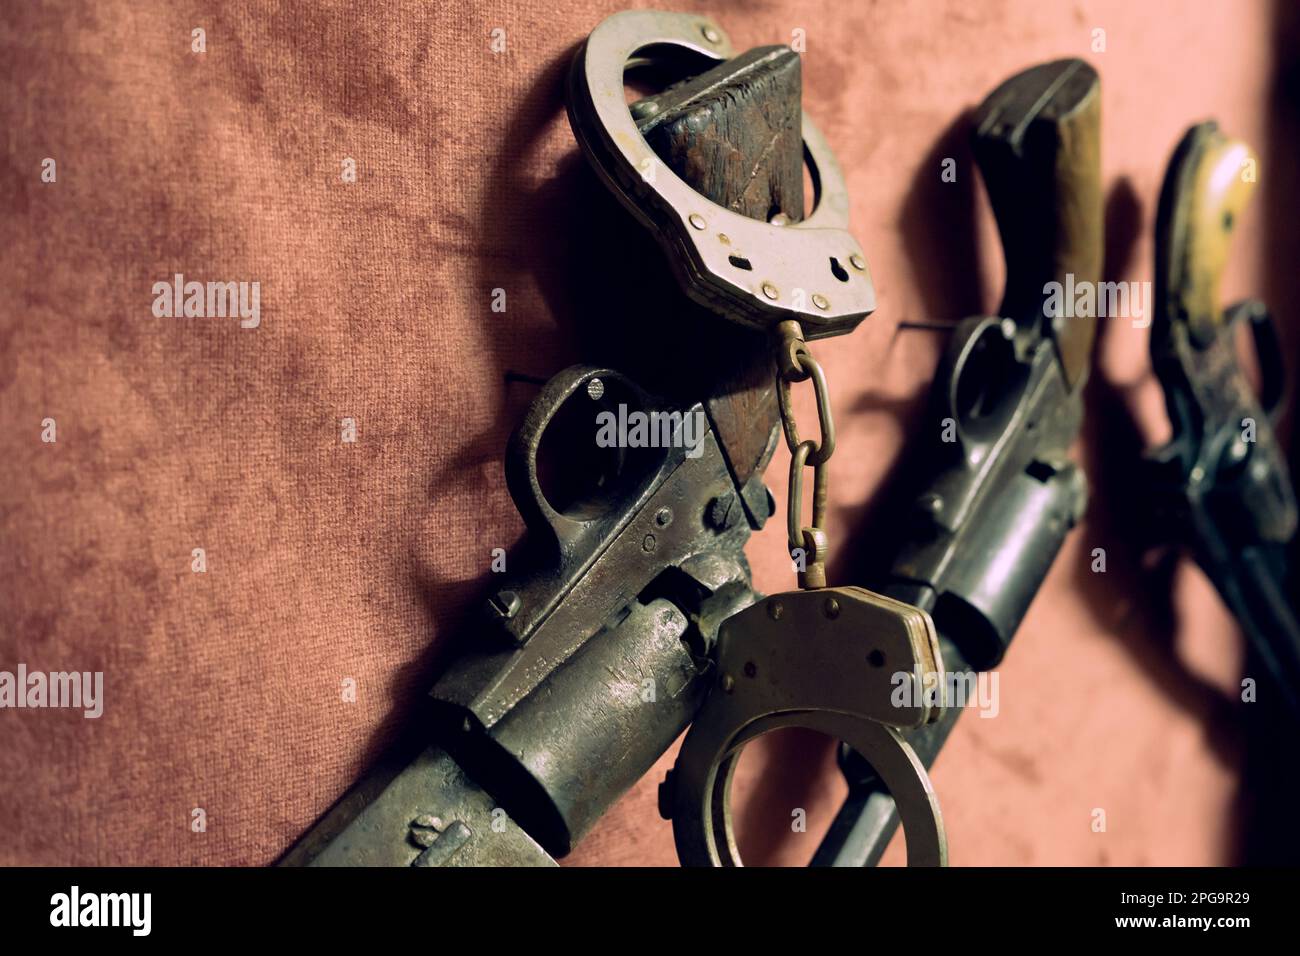 A pair of black handcuffs on top of a black retro pistol. Stock Photo